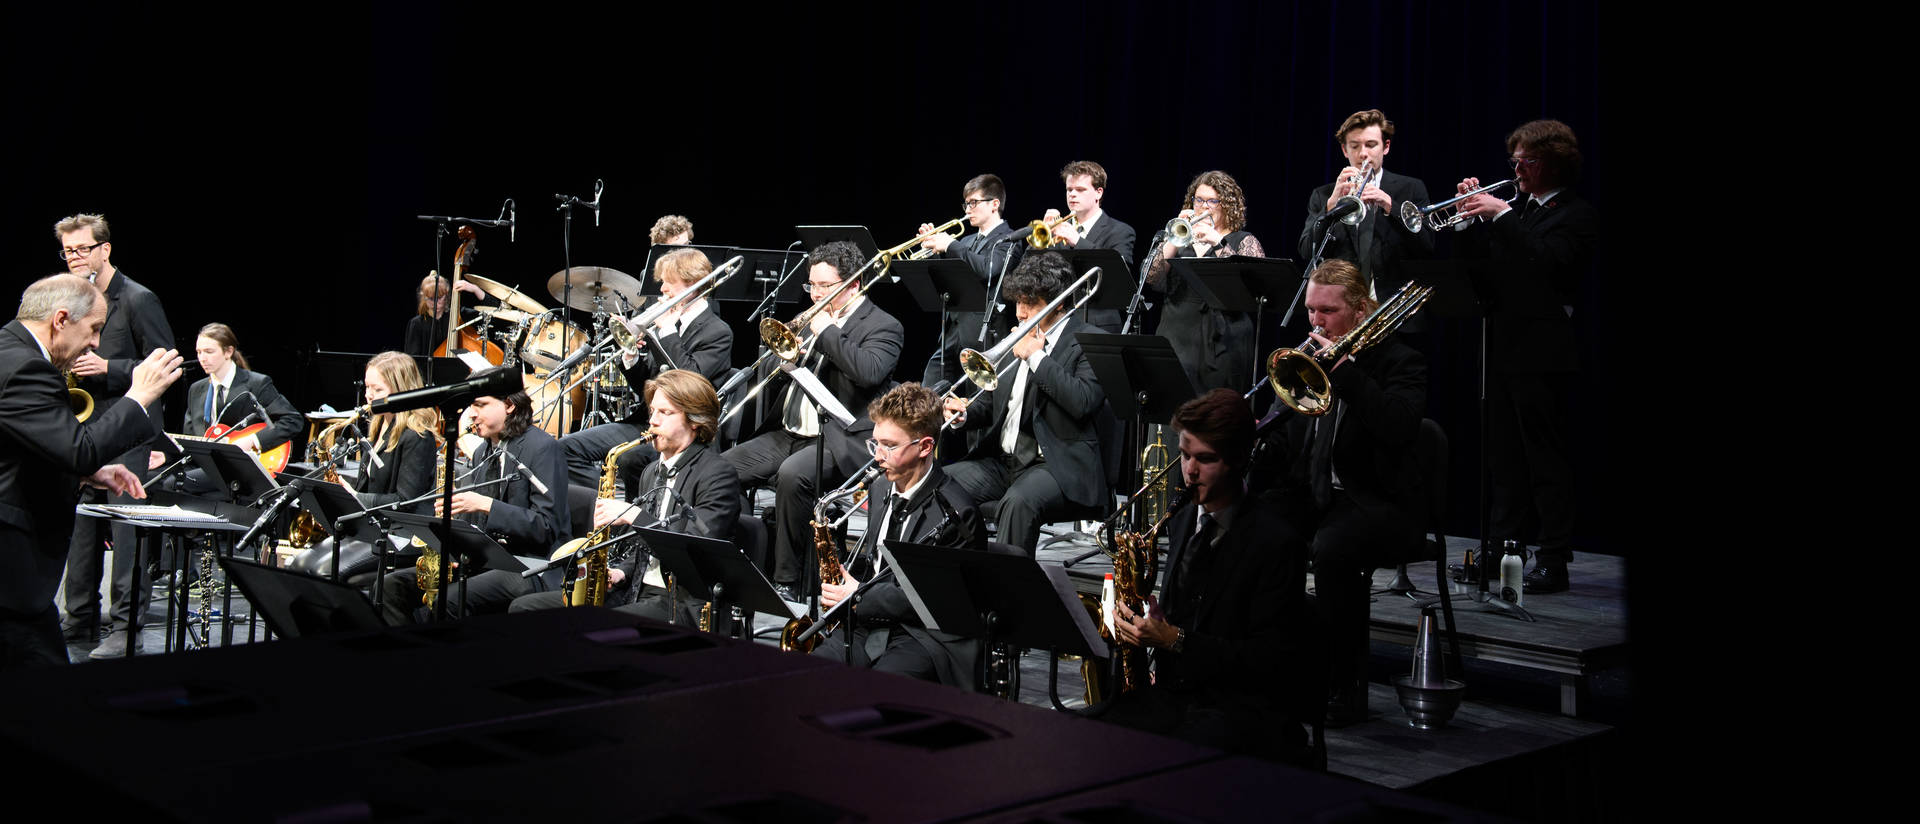 Students perform on stage at Jazz Festival